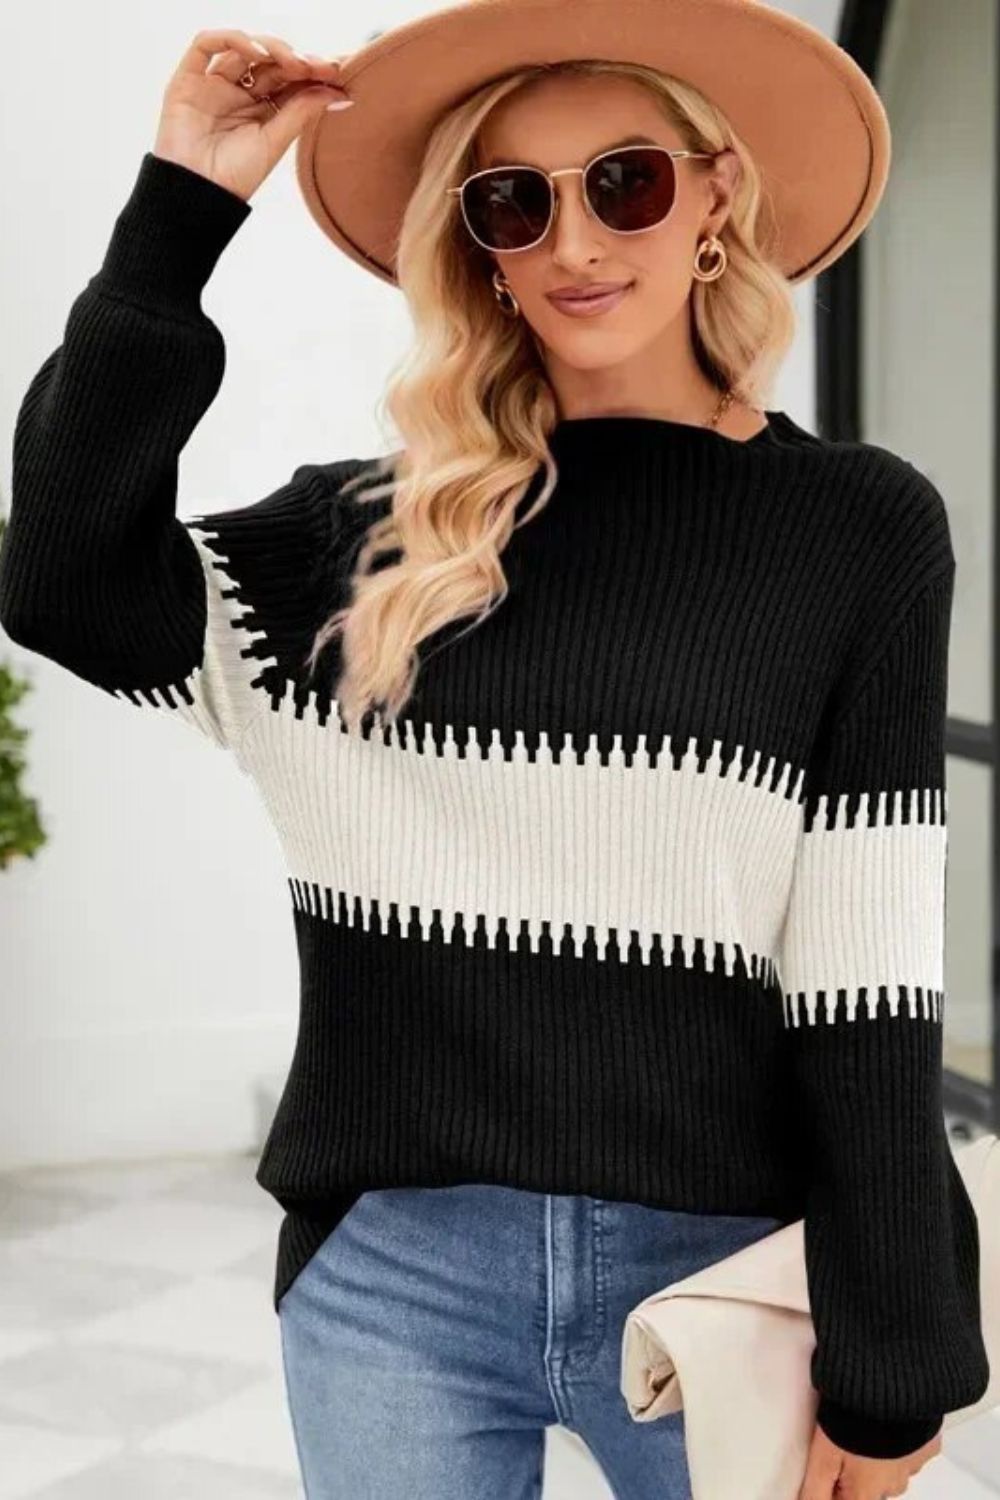 Gominglo - Casual Simple Turtleneck Sweater Long Sleeve Striped Pullover Sweater Chunky Knit Jumper GOMINGLO